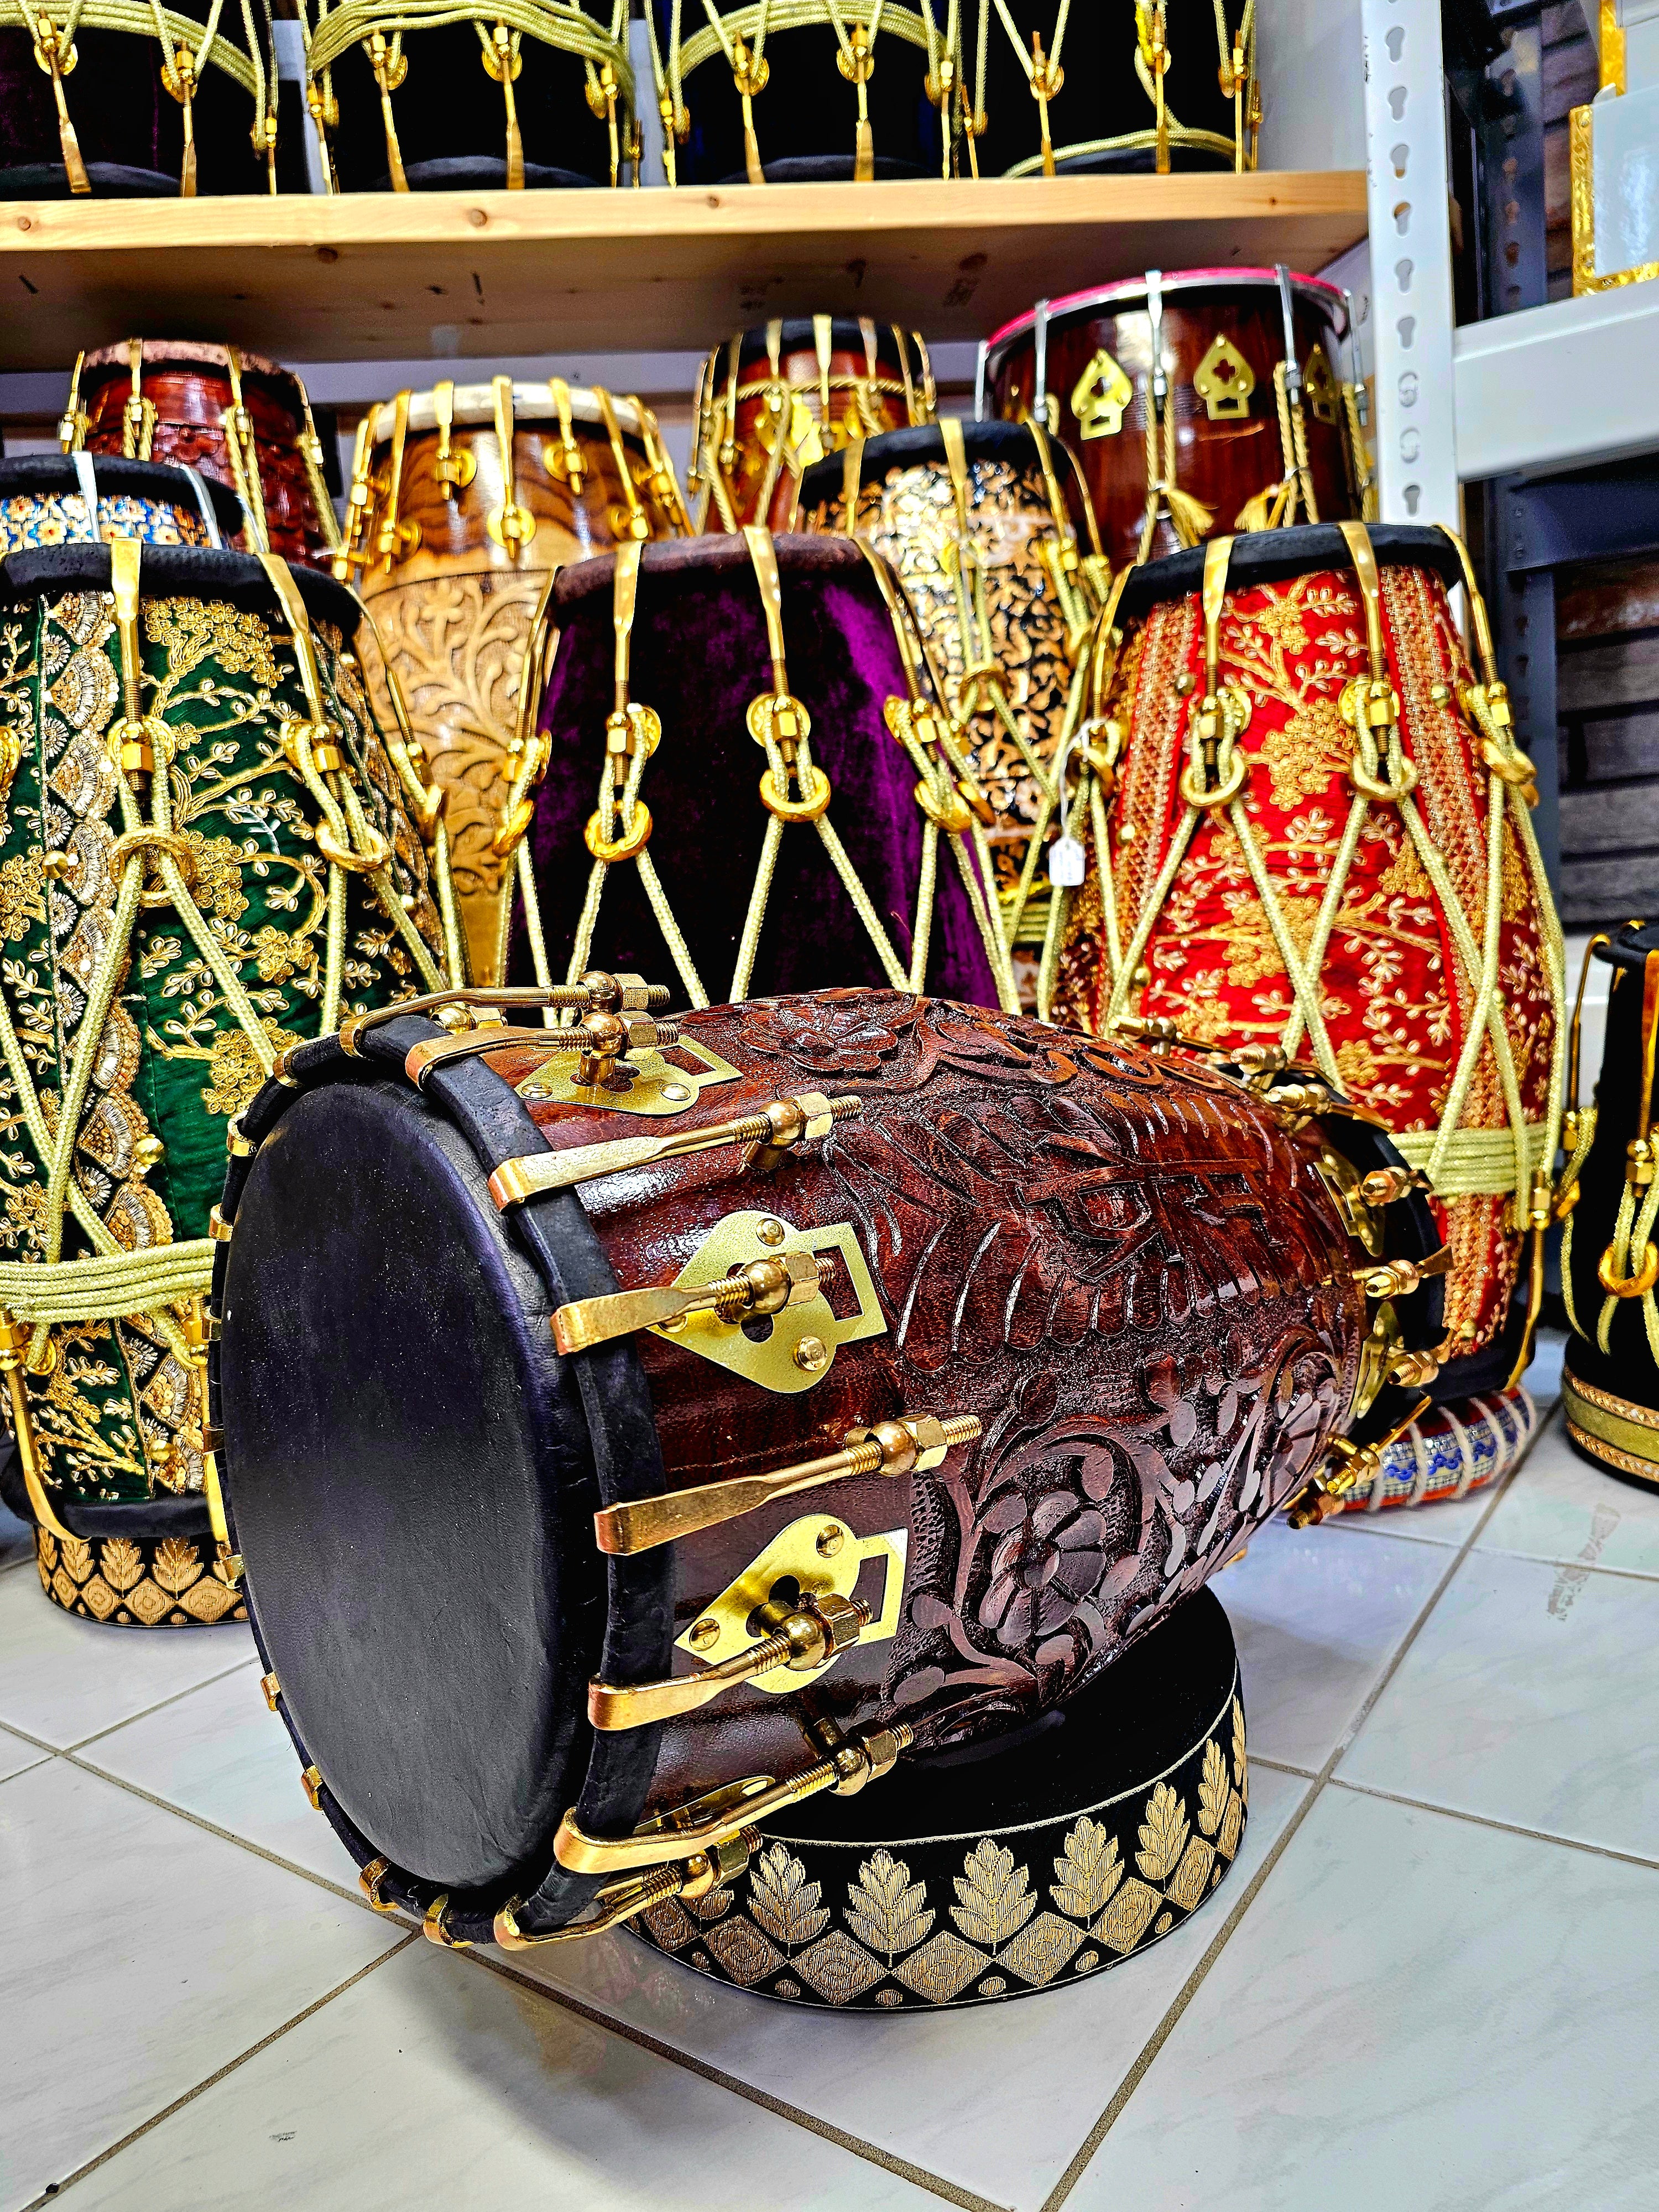 Prem's Florid Echo: Custom Floral Engraved Black Sheesham Dholak with Brass Bolts and Ebony Black Skin (Includes 2 Extra Concert Quality Skins ($50 Each))